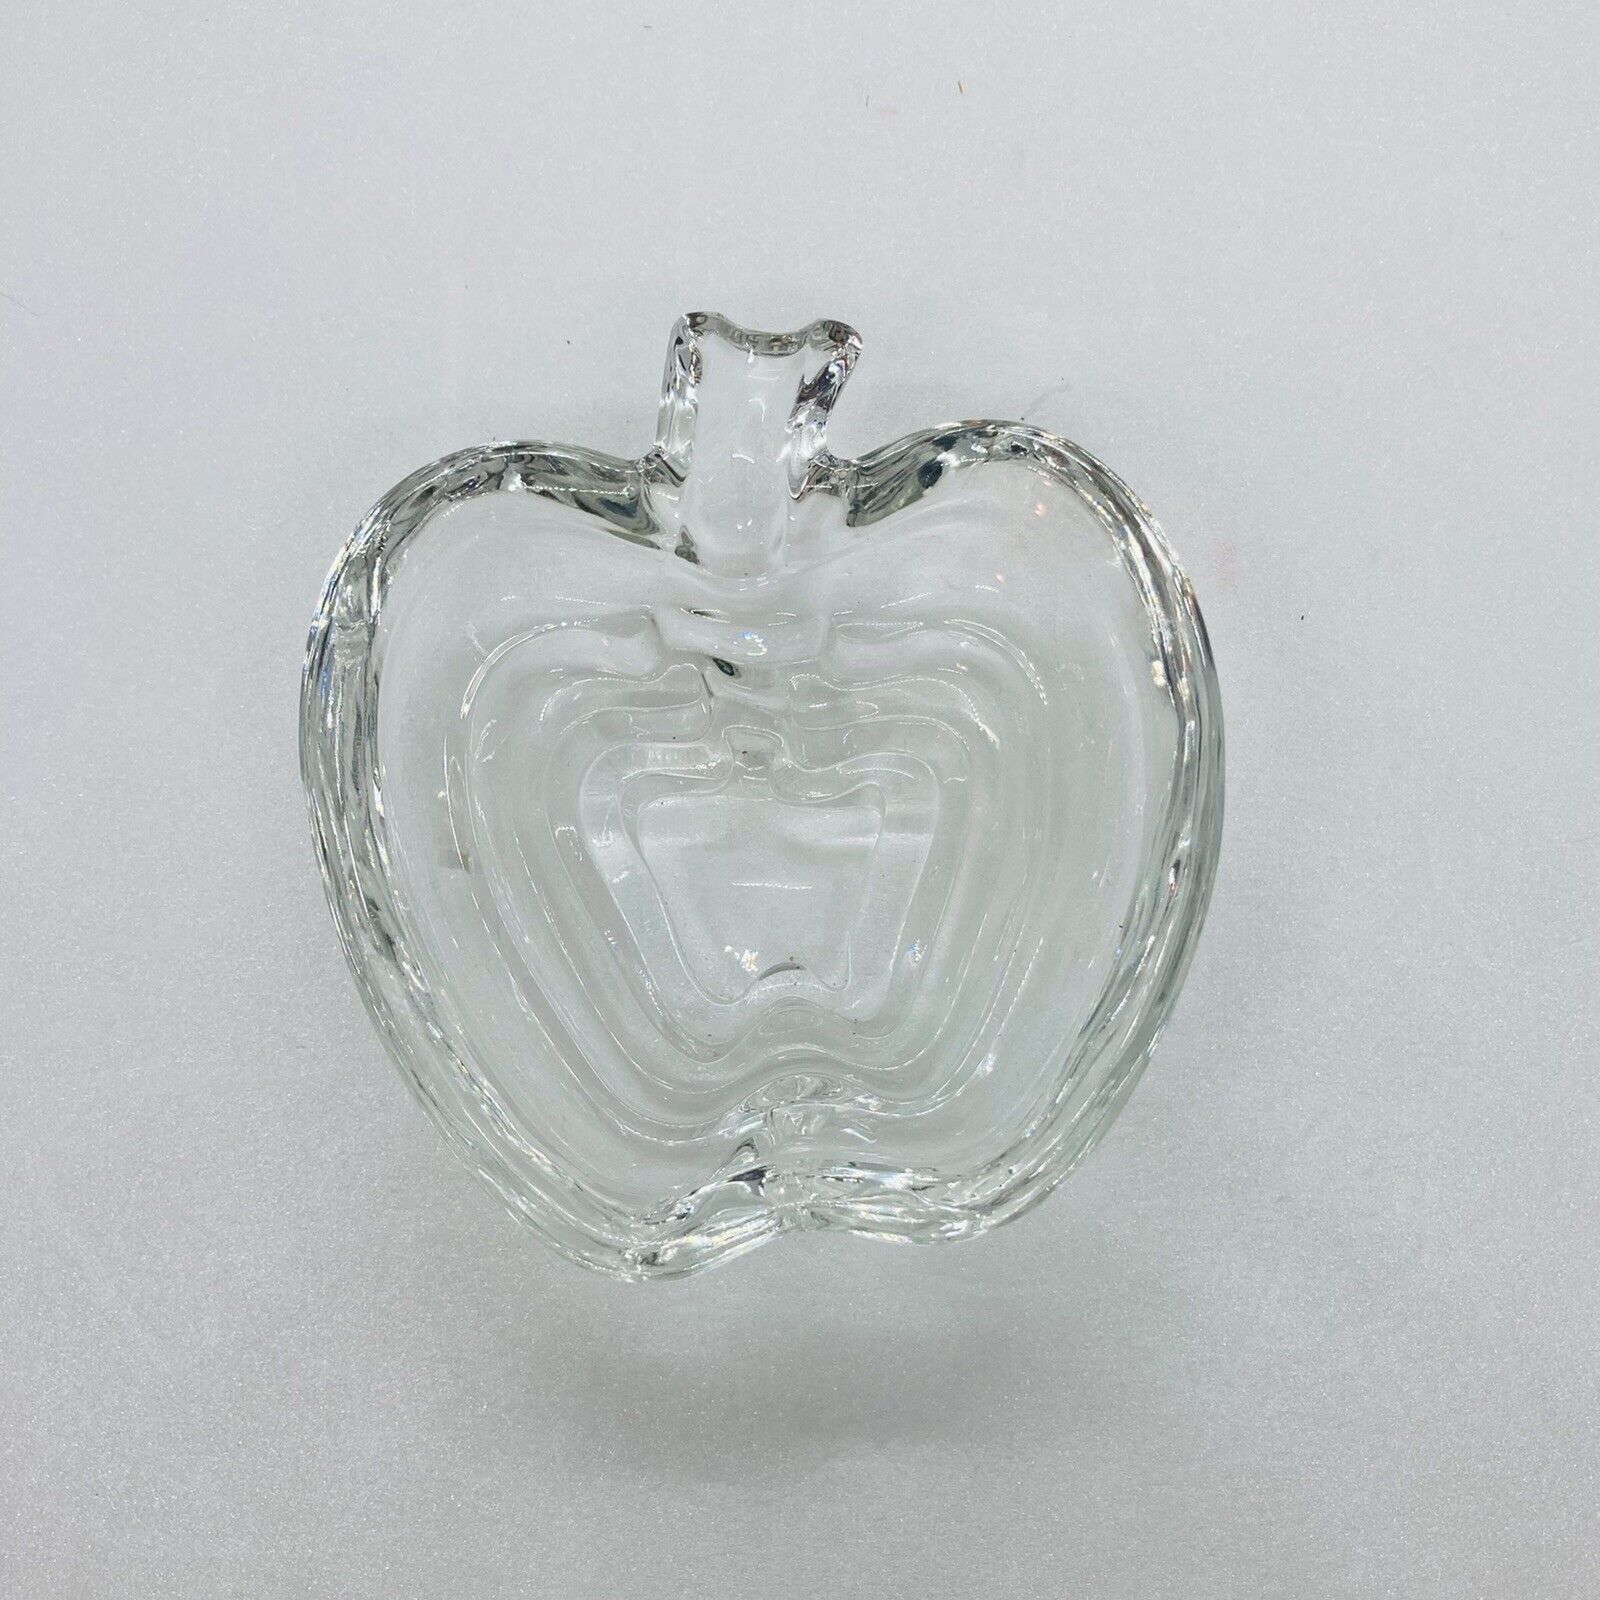 Vintage 1970s Apple Shaped Crsytal Glass Ashtray Dish Tray Weight Unique Art 25